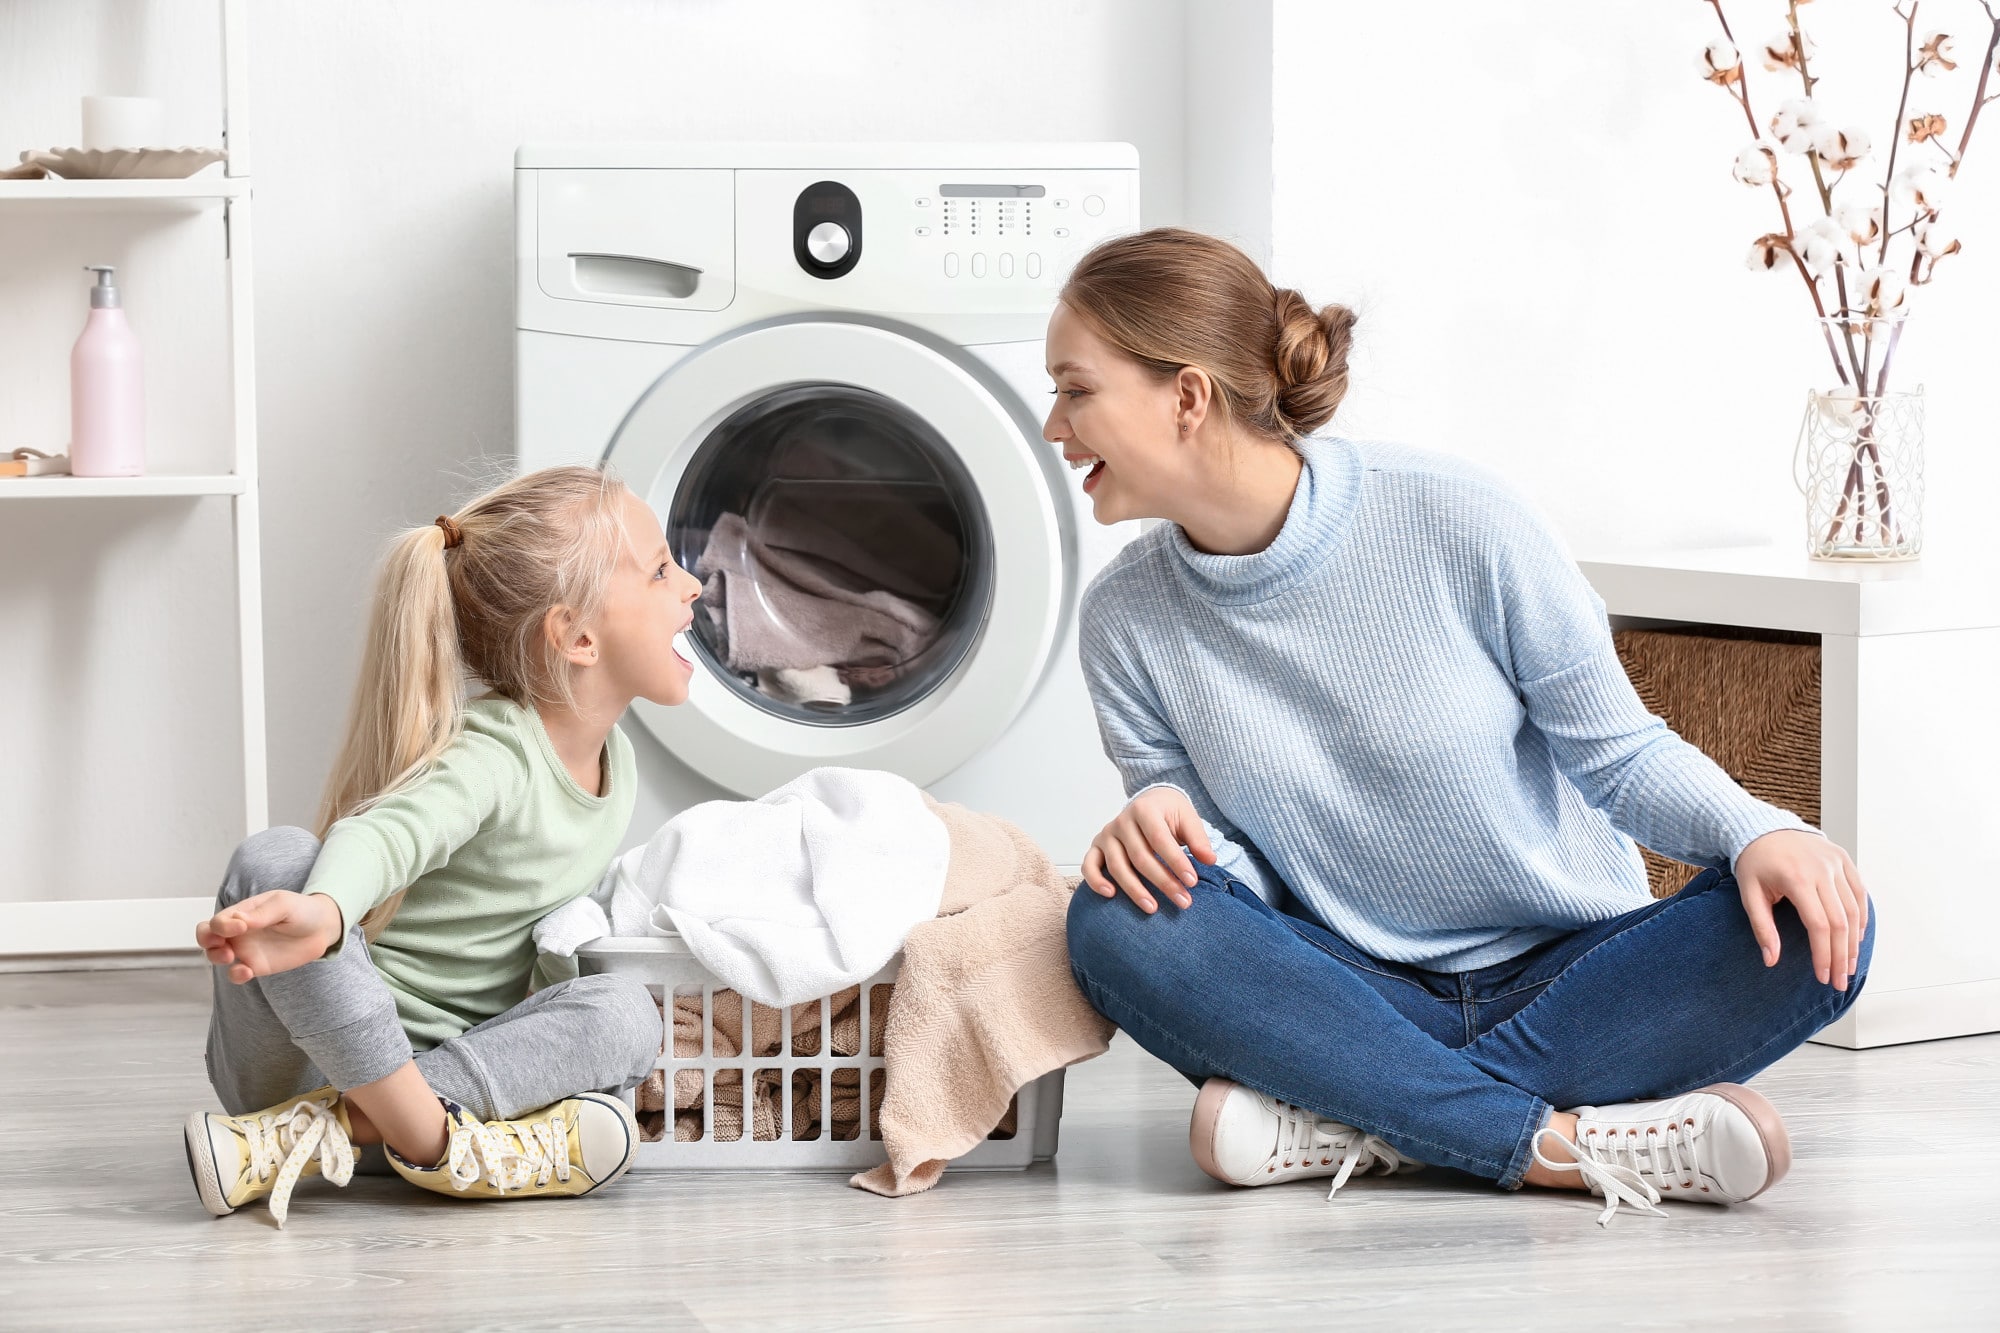 Wash Your Clothes the Right Way! 11 Laundry Tips to Know